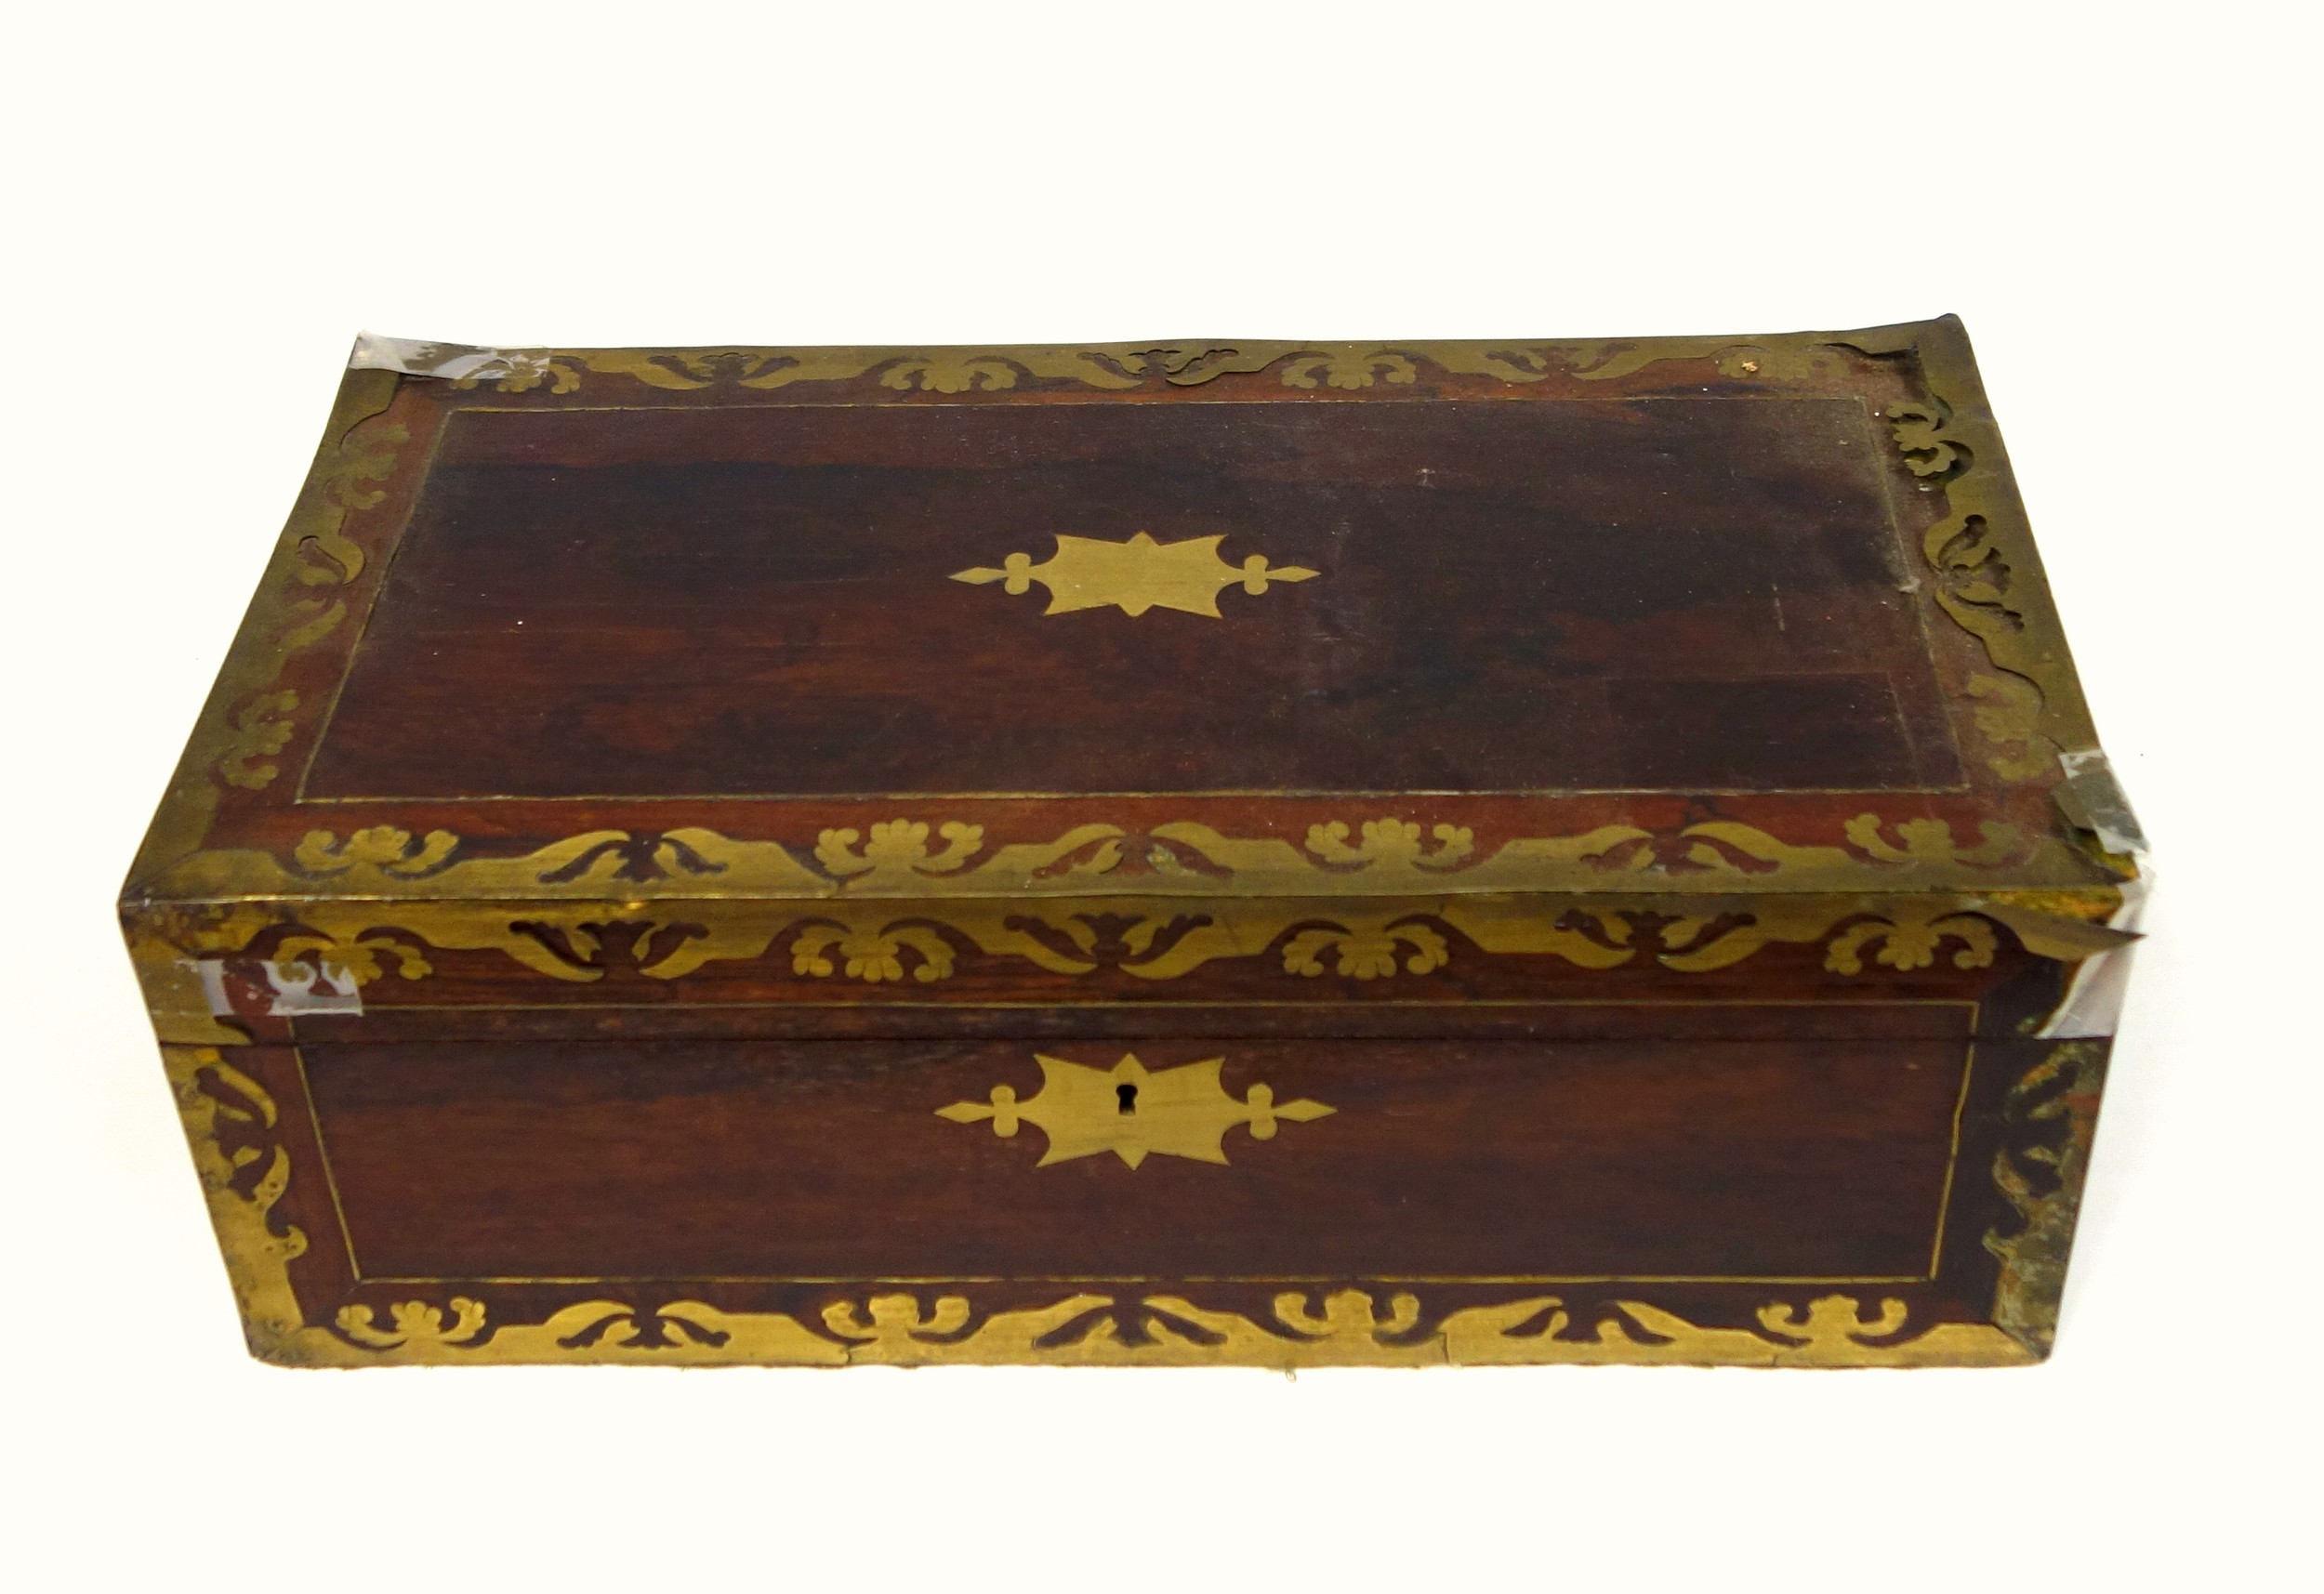 Victorian brass inlaid rosewood portable writing desk with 2 brass covered wells and secret panel